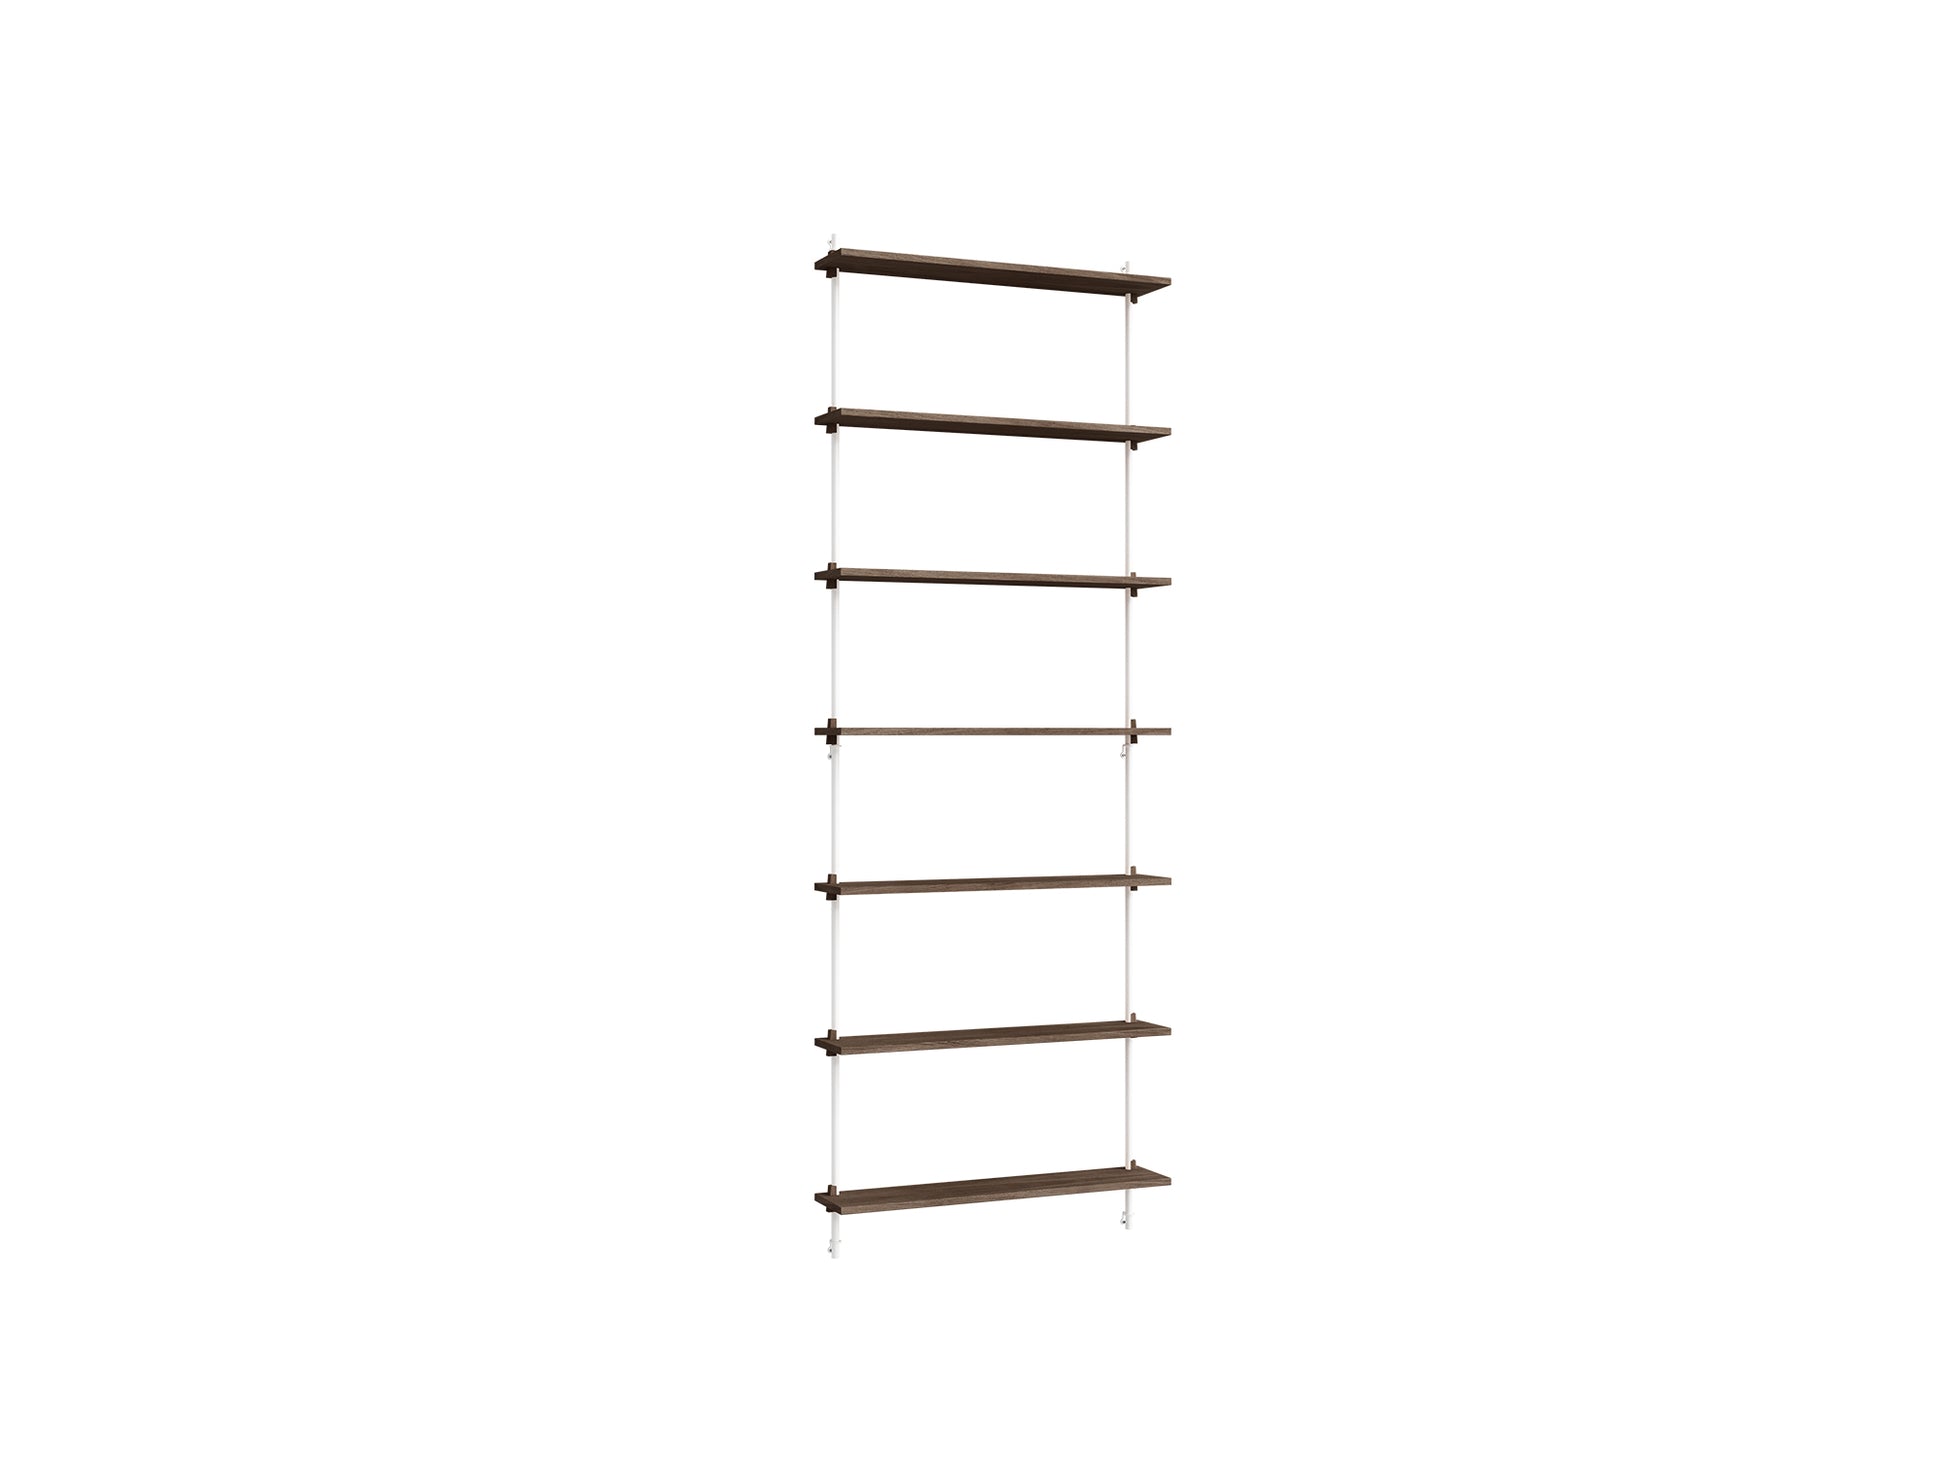 Wall Shelving System Sets (230 cm) by Moebe - WS.230.1 / White Uprights / Smoked Oak